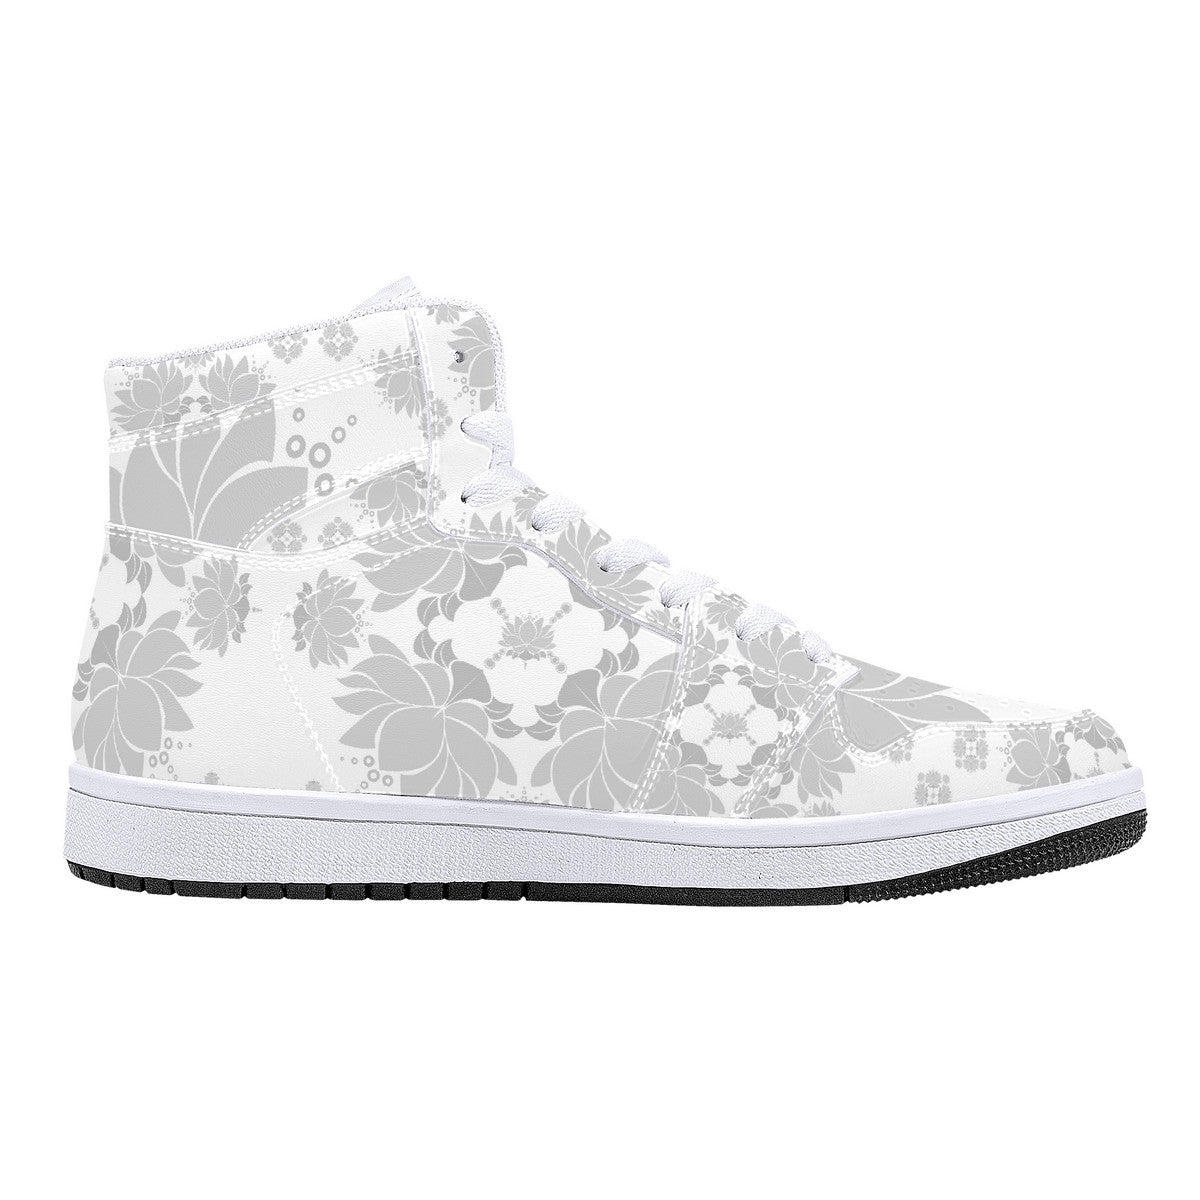 "Nix Lotus" High-Top Synthetic Leather Sneakers